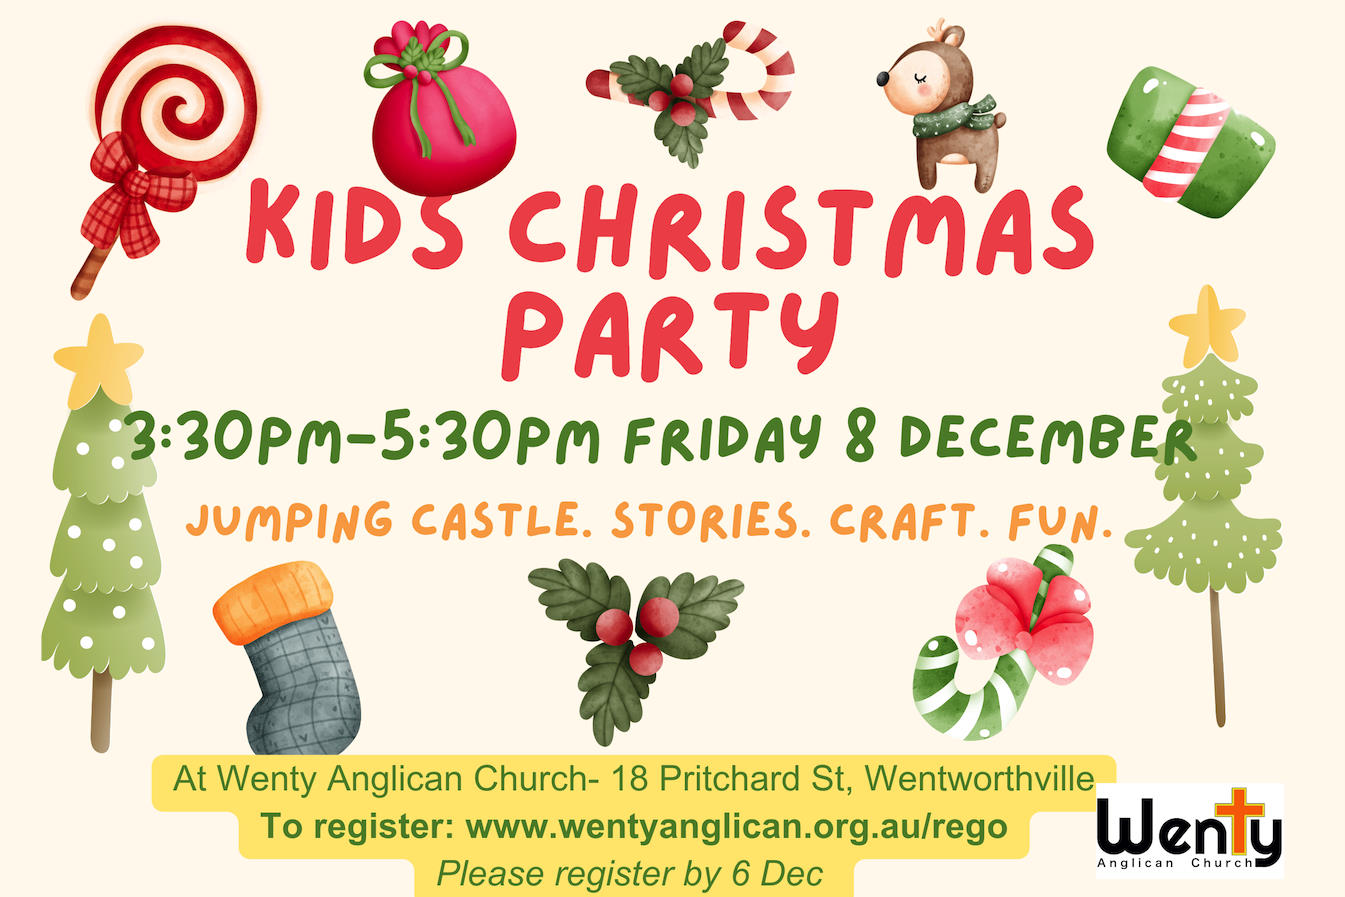 Kids Christmas Party. 3:30pm-5:30pm, Friday 8th December. Jumping Castle. Stories. Craft. Fun.